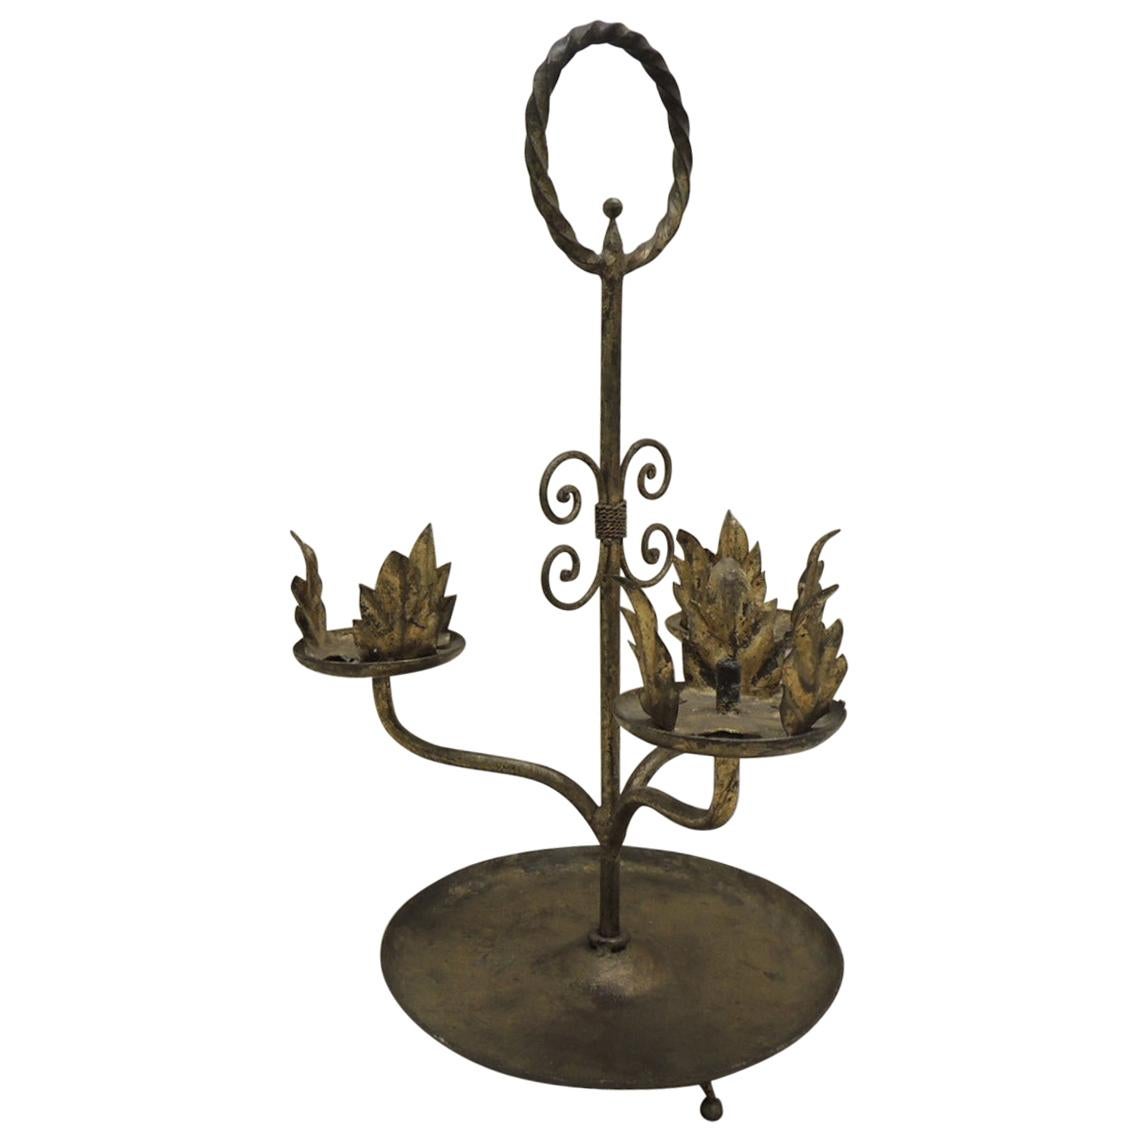 Metal Candle Holder Rustic Hand-Forged Wrought Iron 2 Arm Candelabra 1960s Swedish Christmas